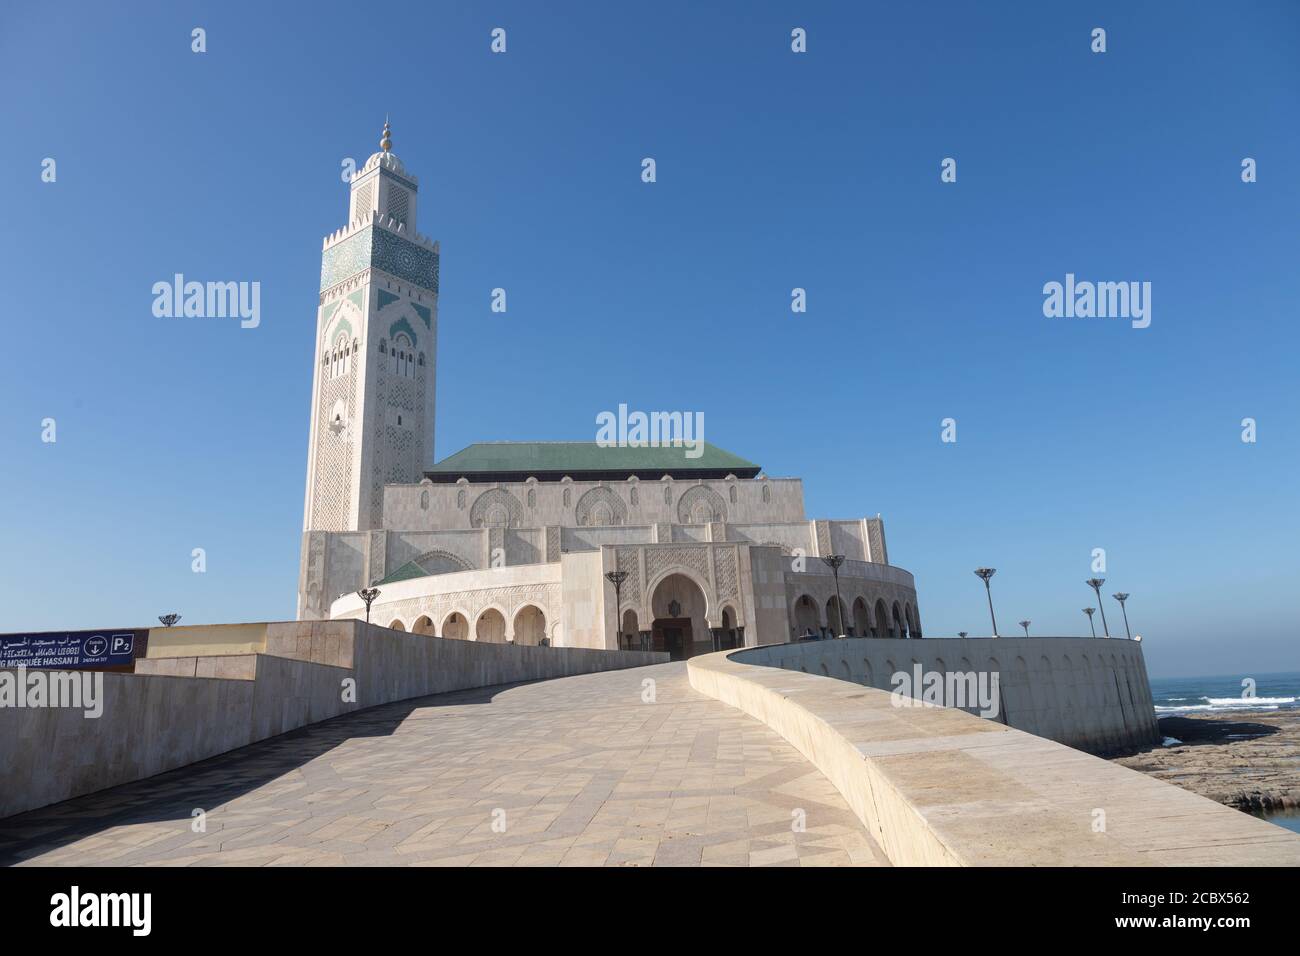 Hassan 2 mosque in Casablanca Morocco 12/31/2019 with minaret and blue sky Stock Photo